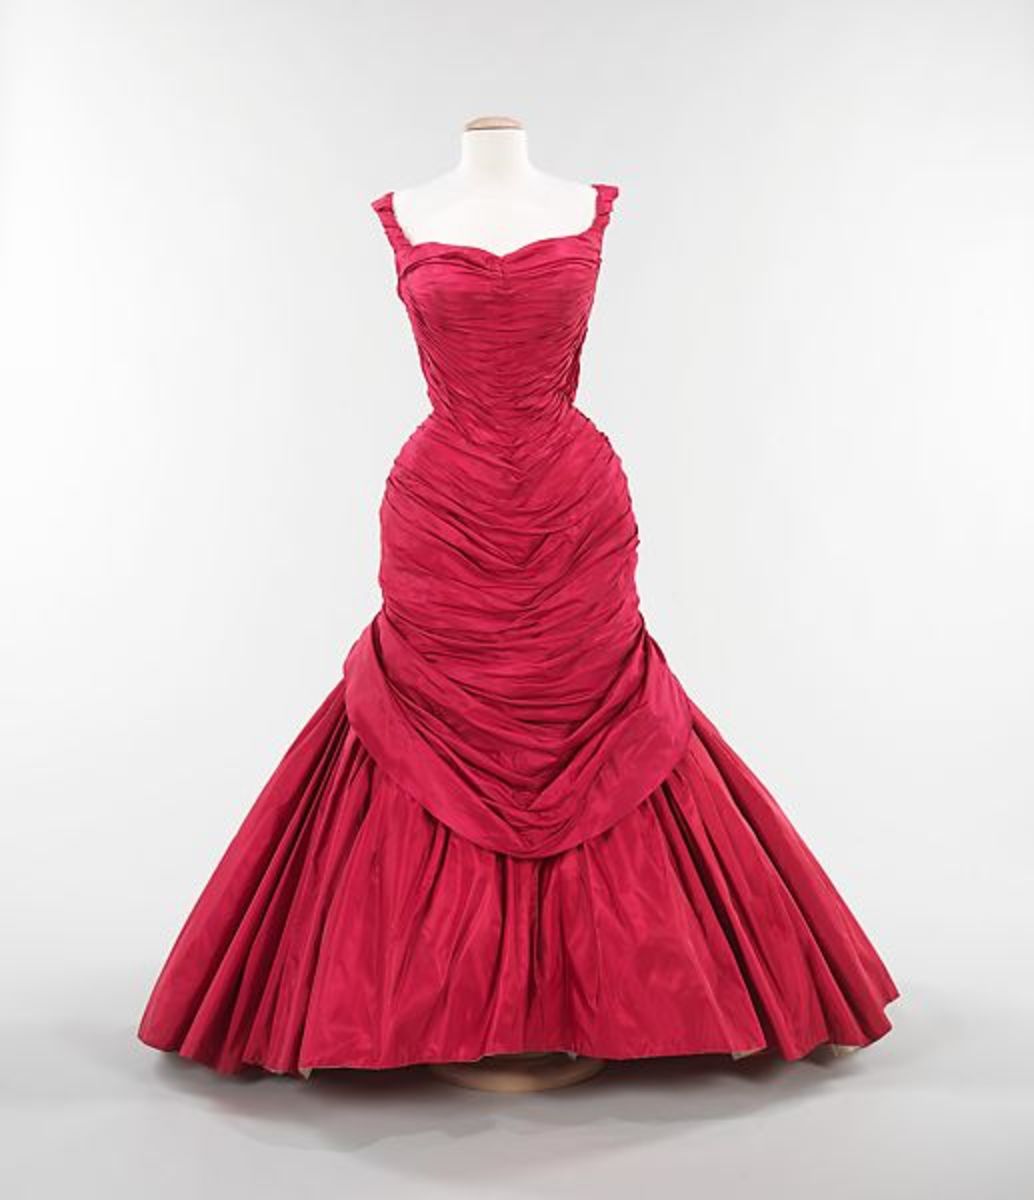 A red, pink and white tulle version of the Tree gown in the collection of the Metropolitan Museum of Art.